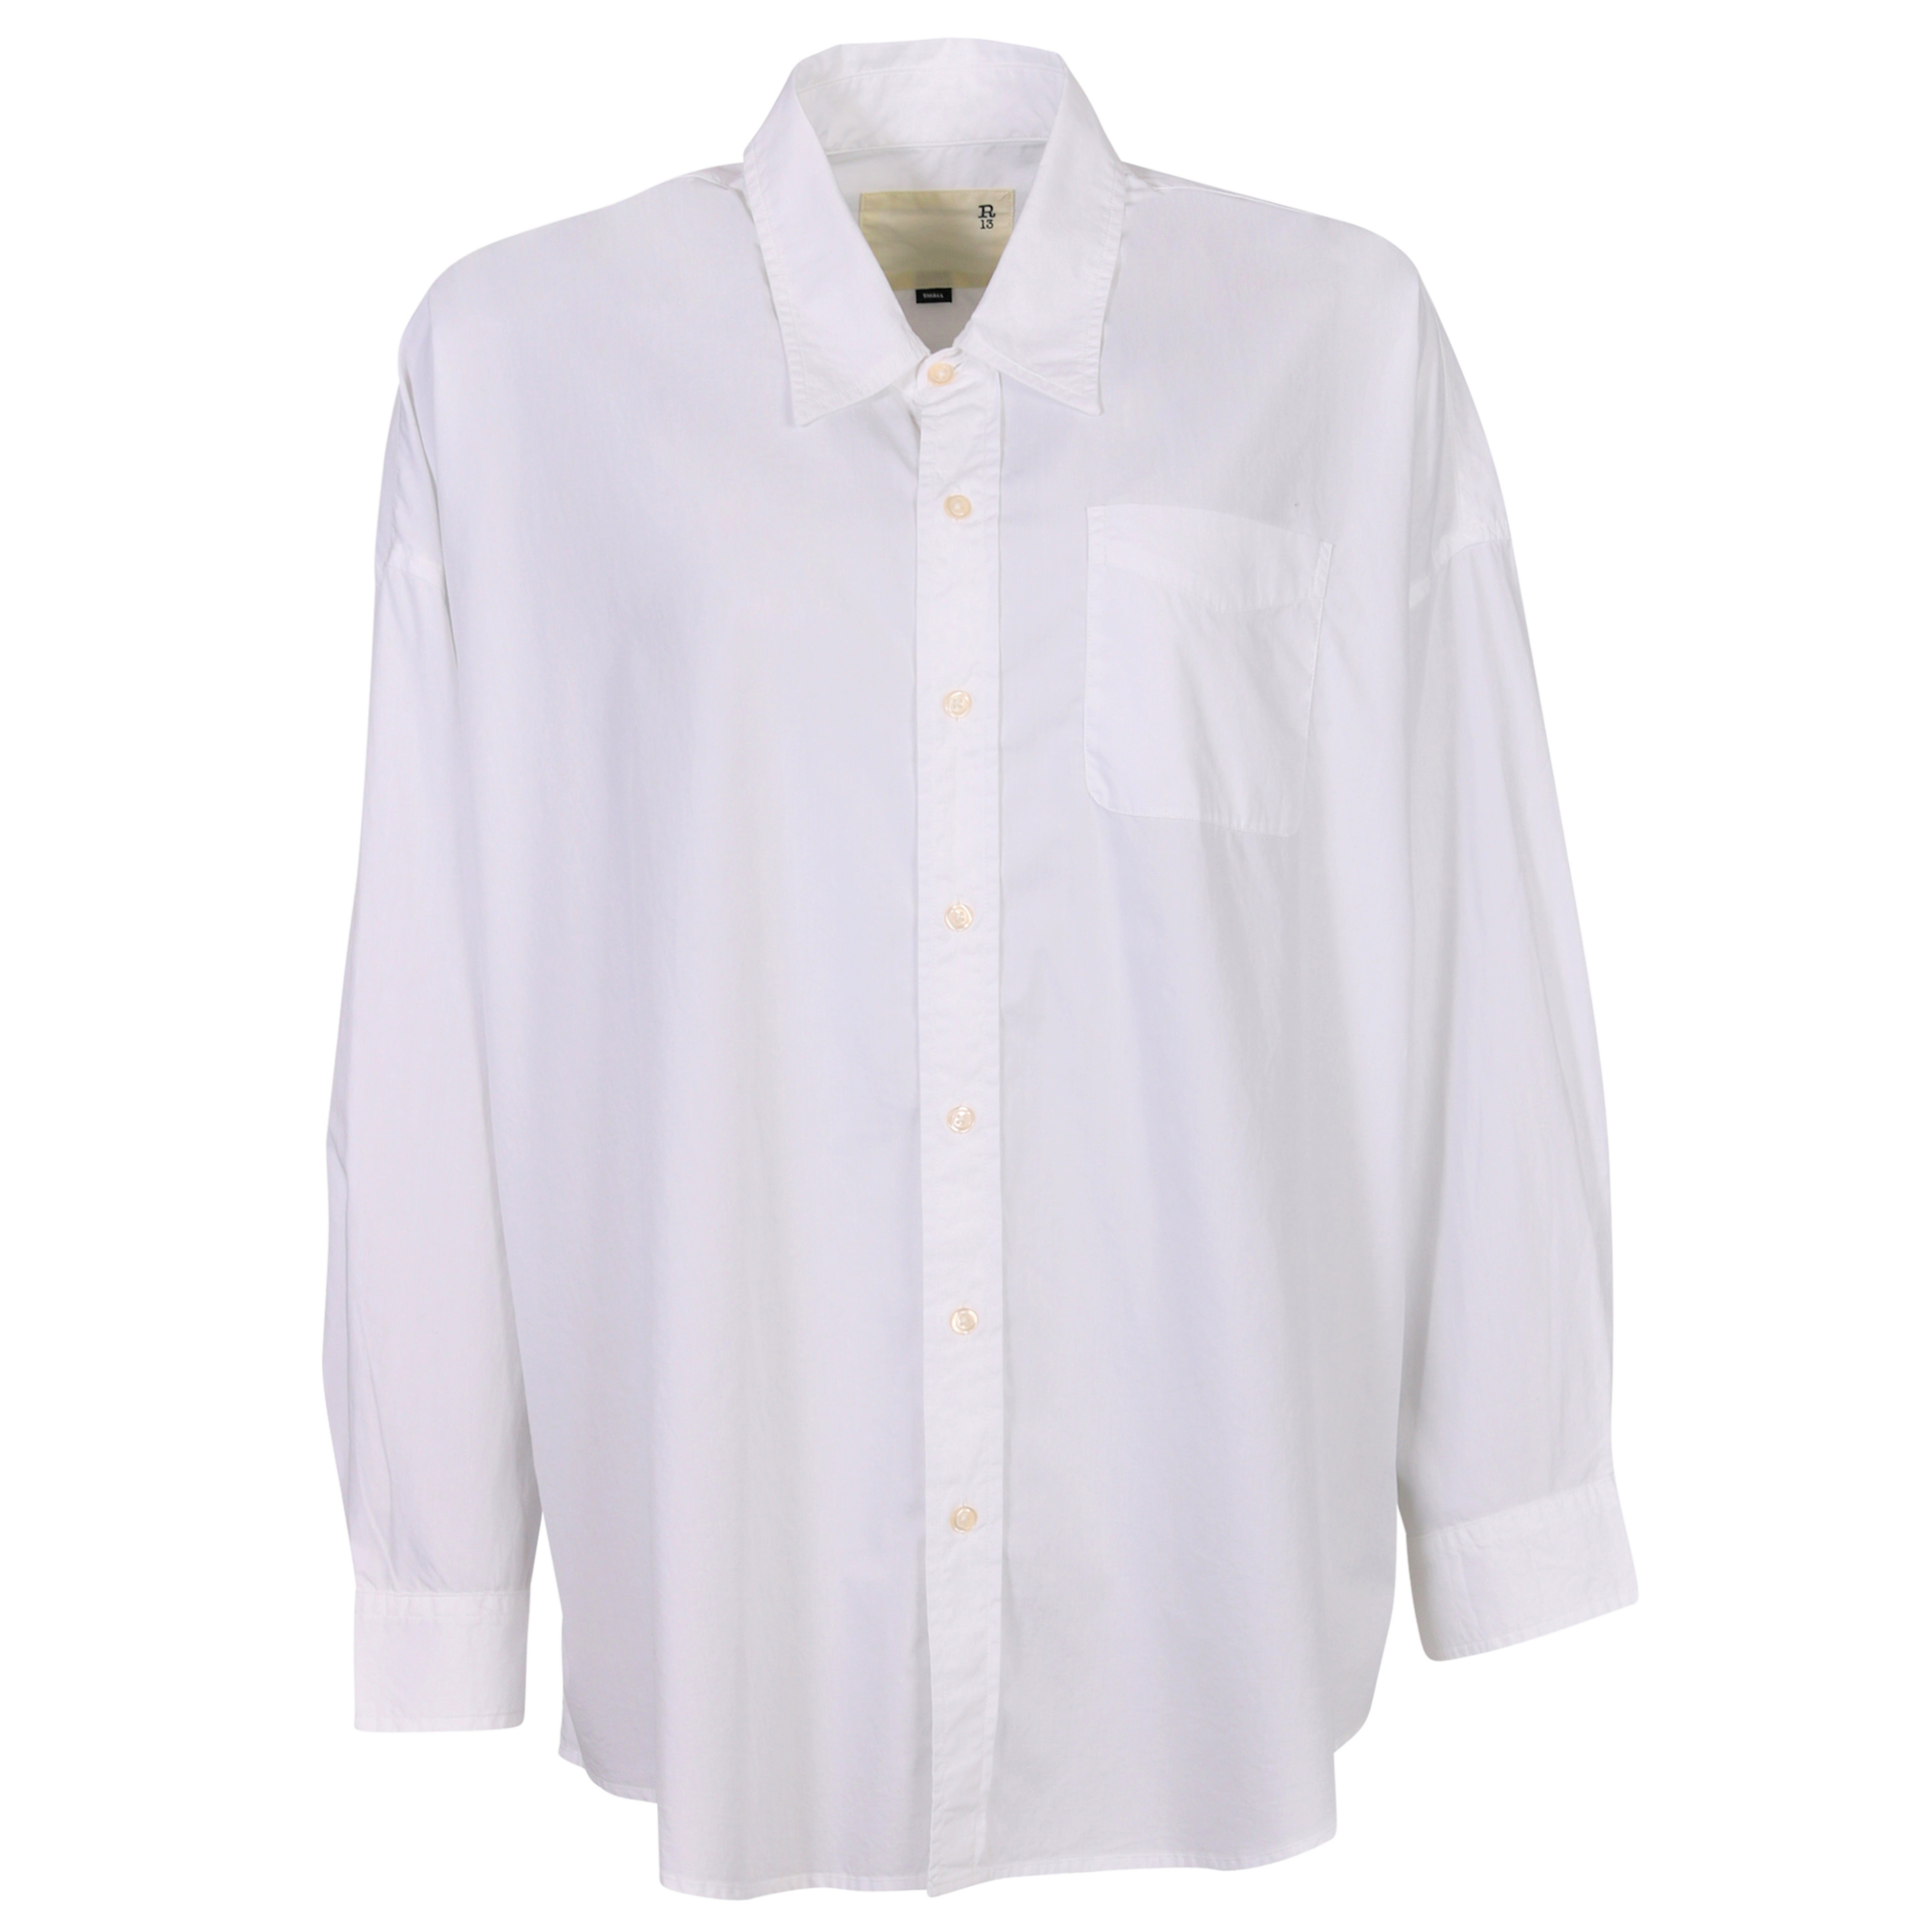 R13 Drop Neck Oxford Shirt in White XS